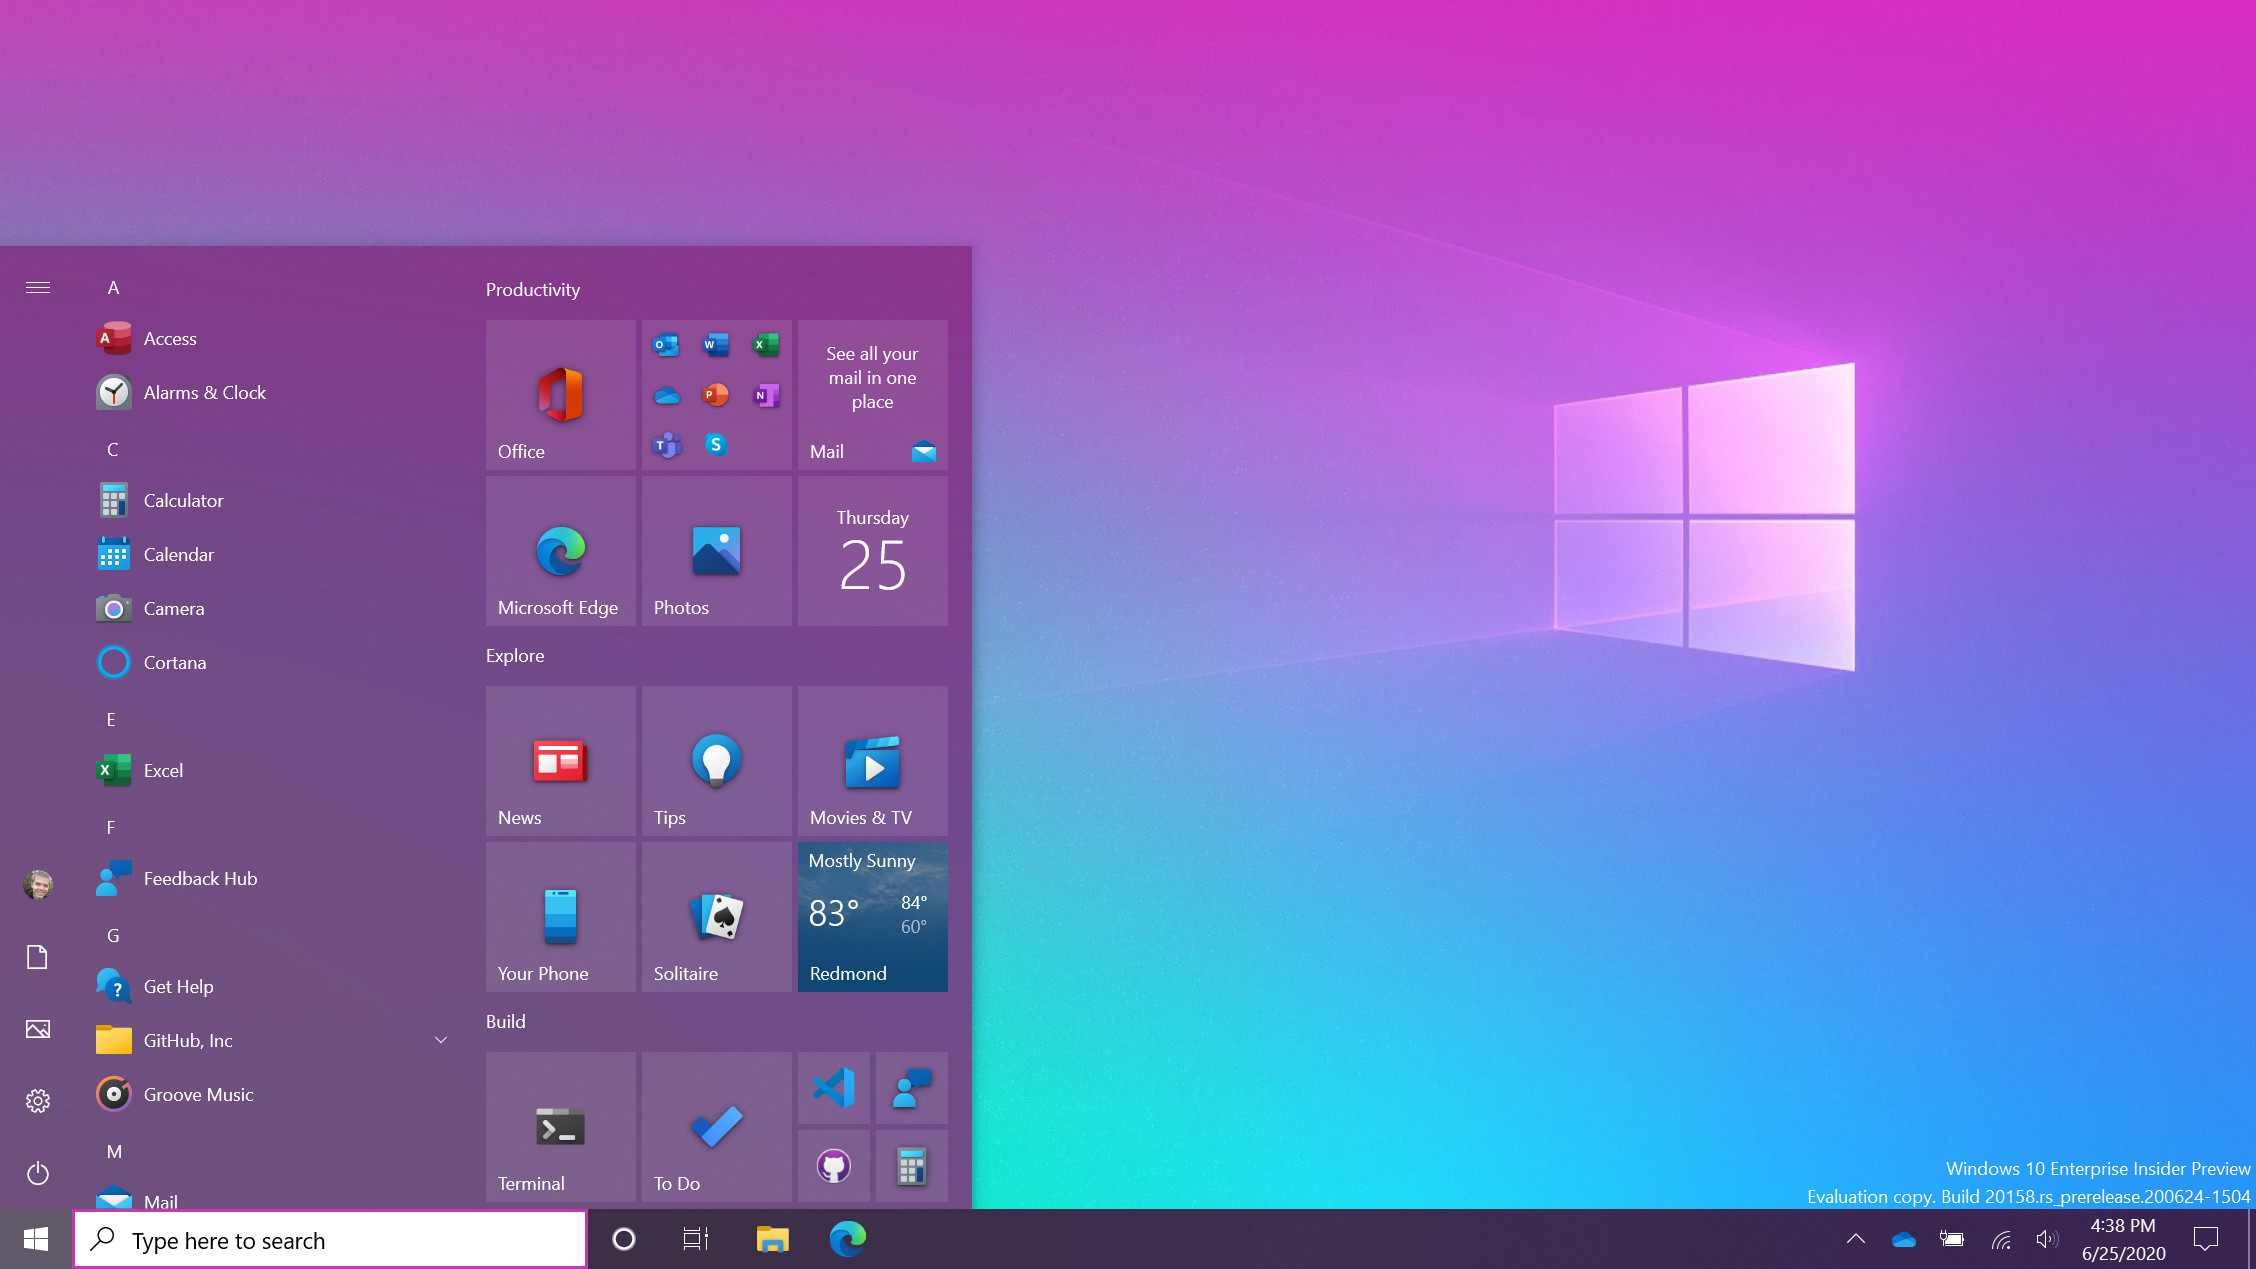 Windows 10’s next update could come with bigger changes including a new Start menu